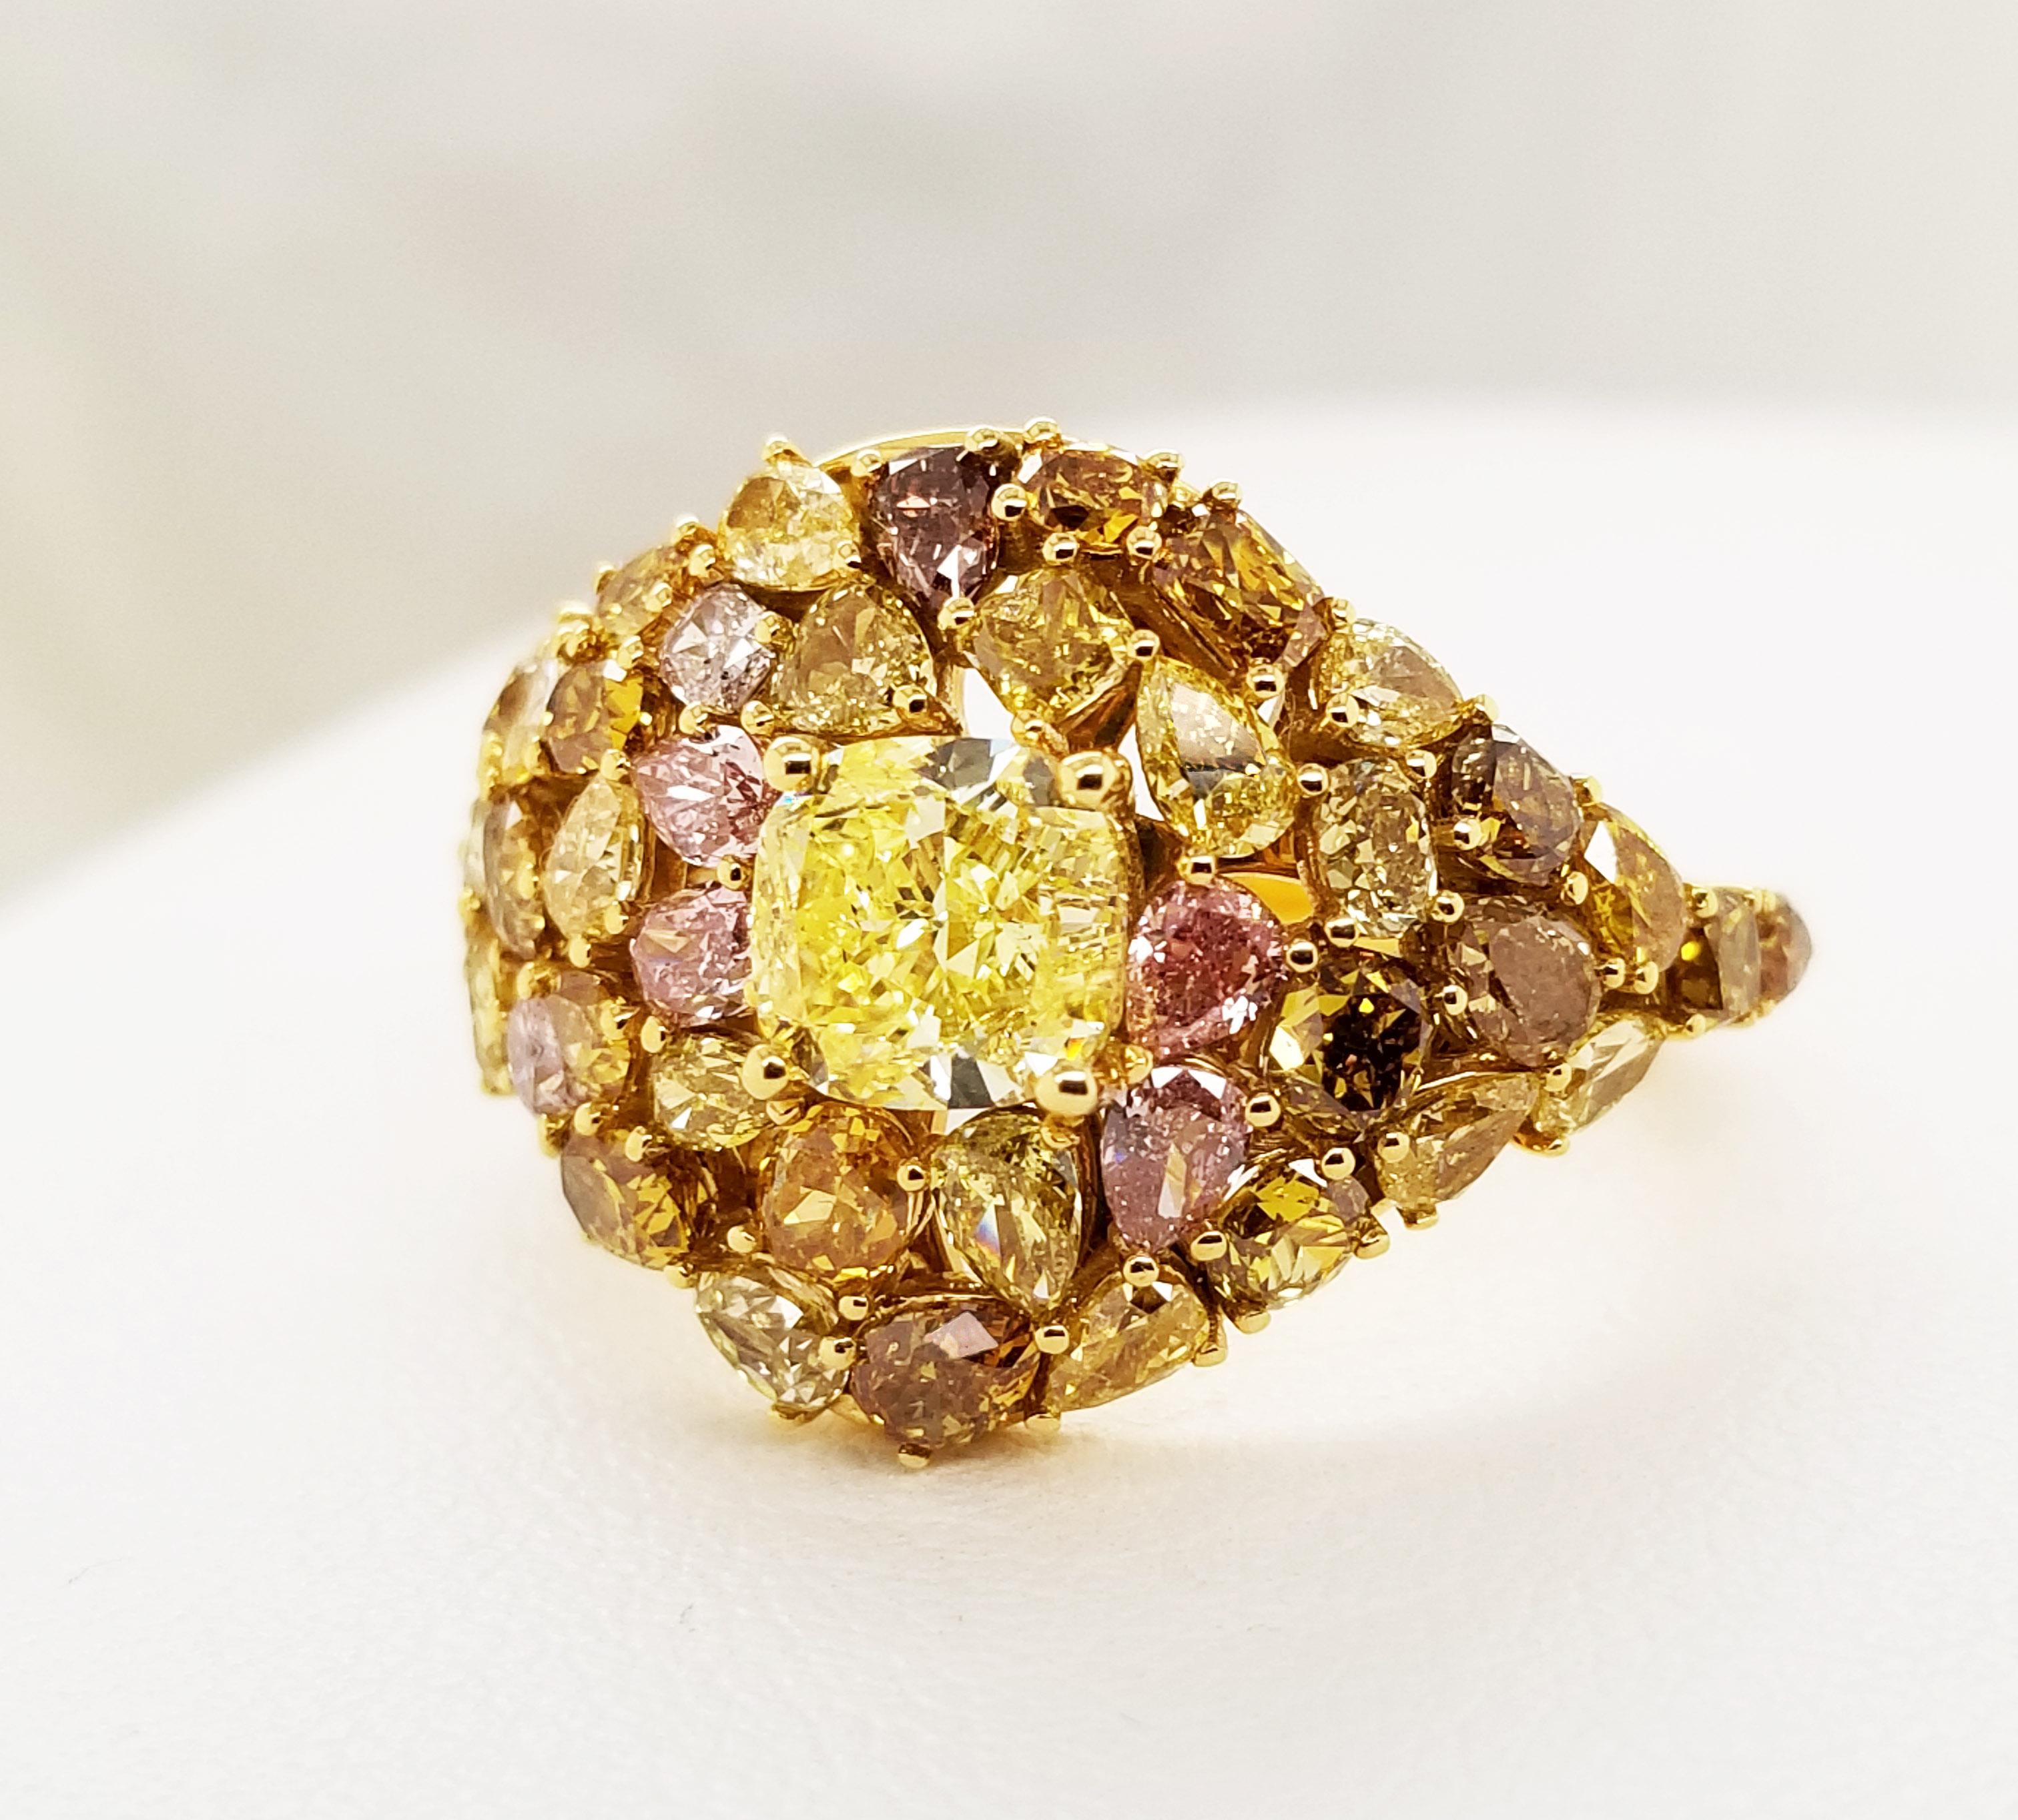 Cocktail Ring with GIA-Certified 1.00 Carat Fancy Yellow Diamond Center Stone Mosaic Style Statement Ring with Fancy Color Diamonds on 18k Yellow Gold Setting. 3.38 carats of fancy color diamonds in mosaic ring with pear, oval and cushion cut